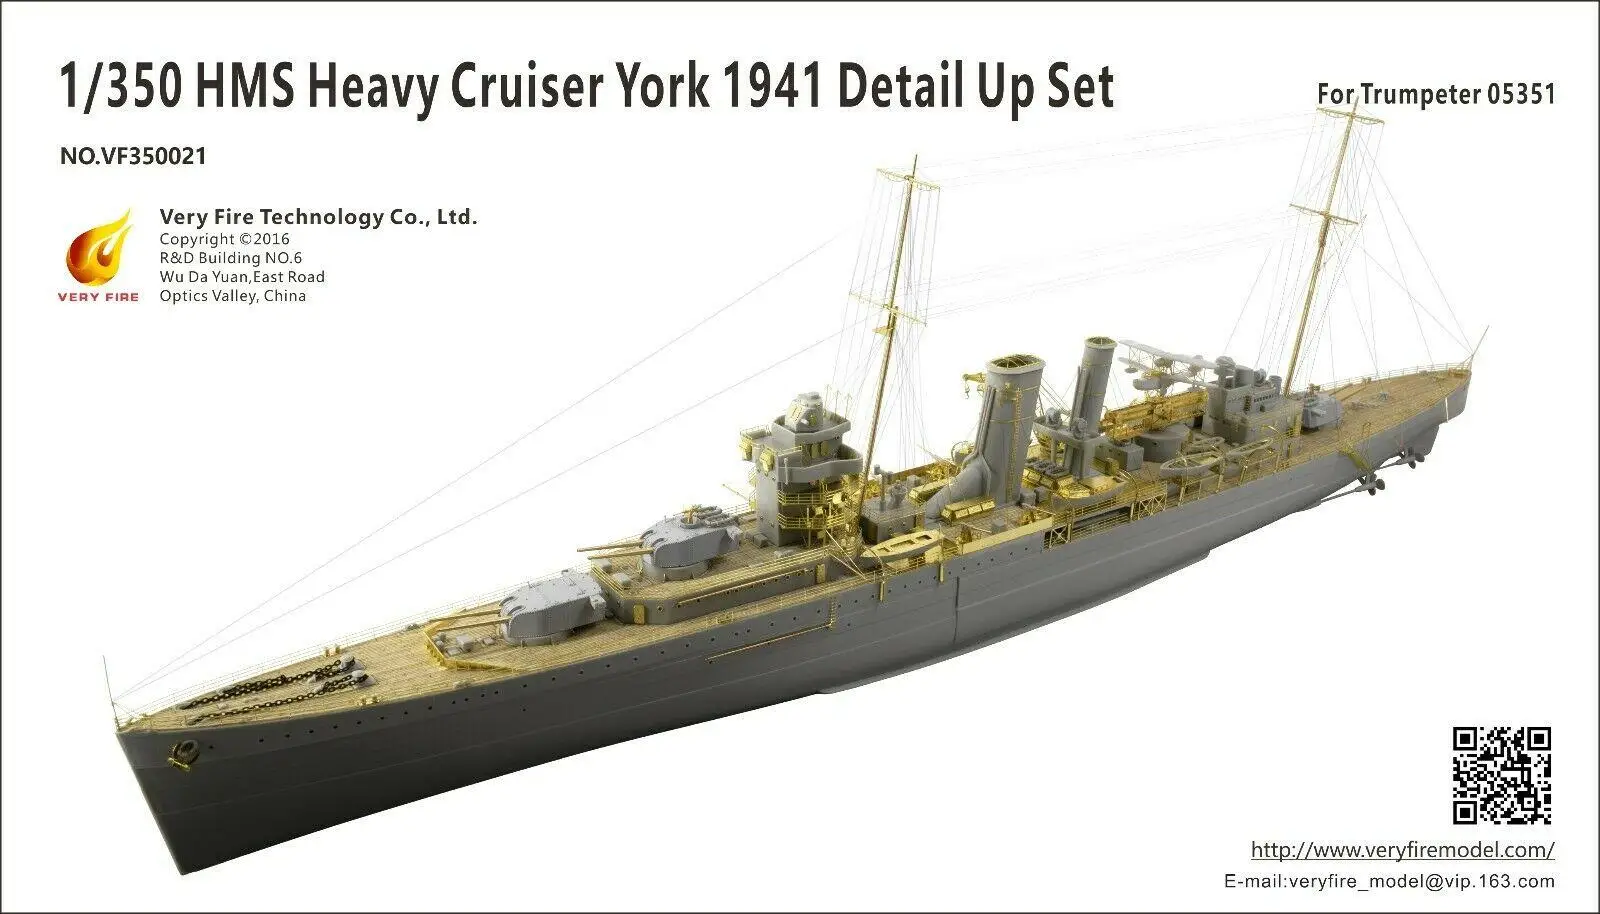 

Very Fire VF350021 Detail Up set for 1/350 HMS York 1941 (For Trumpeter 05351)